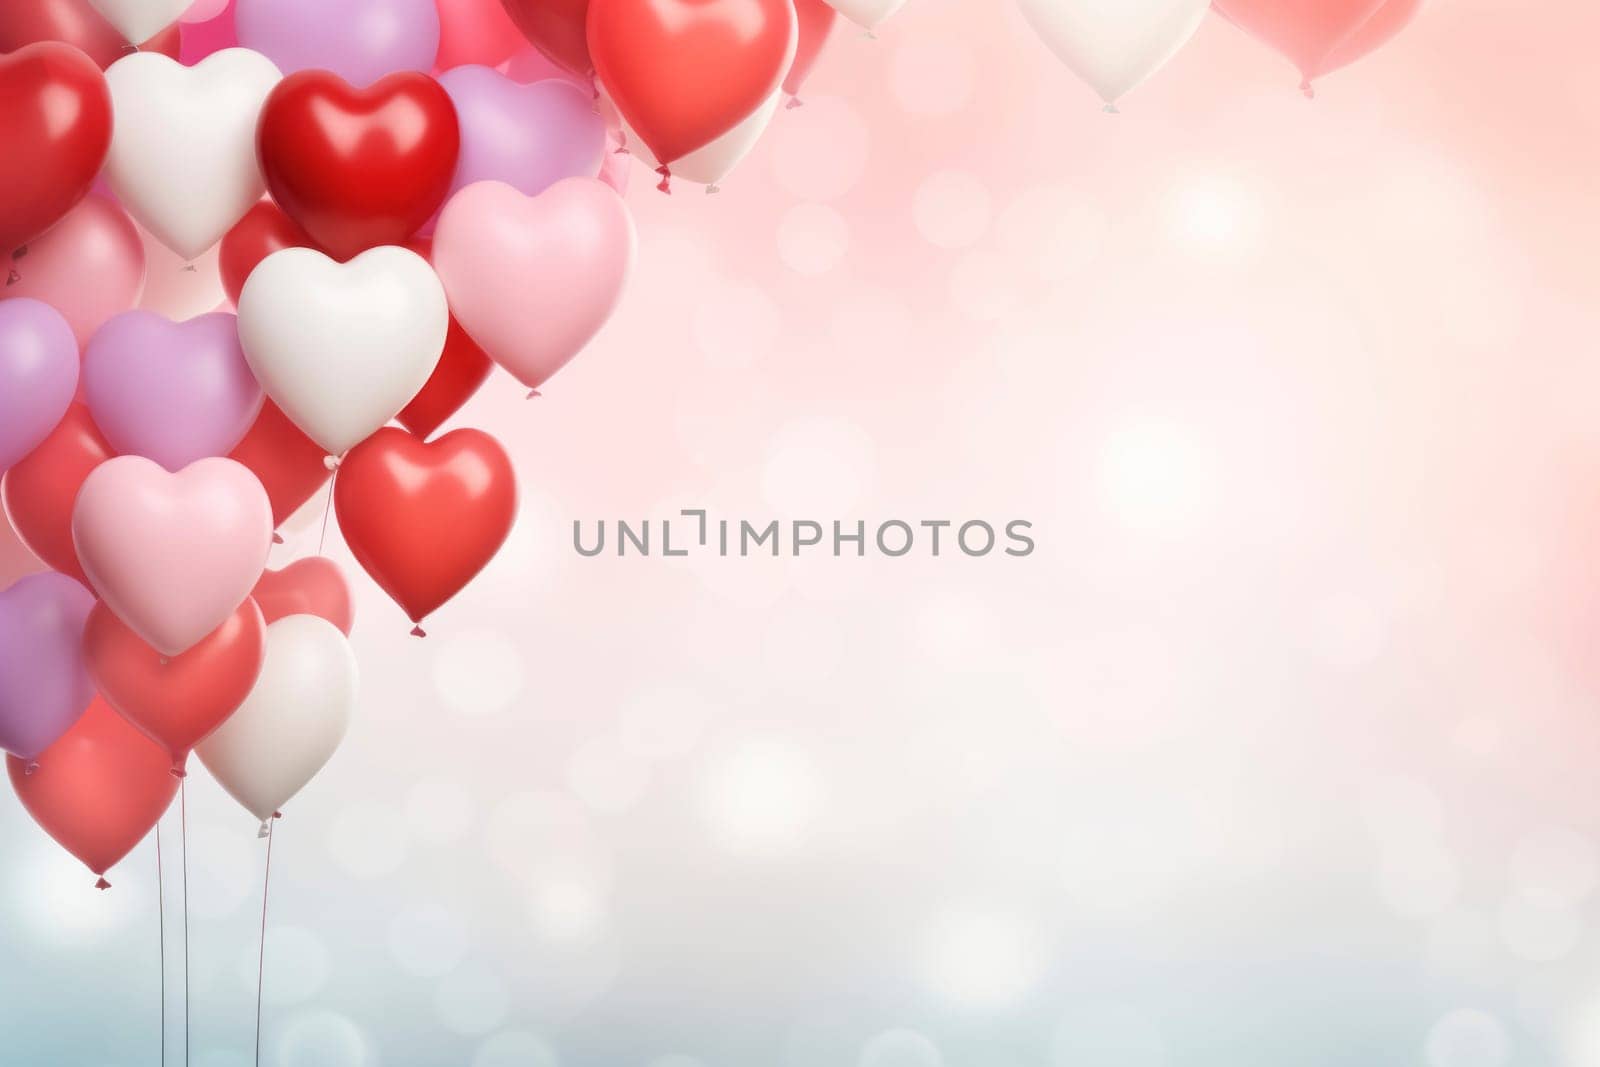 A cluster of heart-shaped balloons in shades of red and pink on a soft, bokeh background